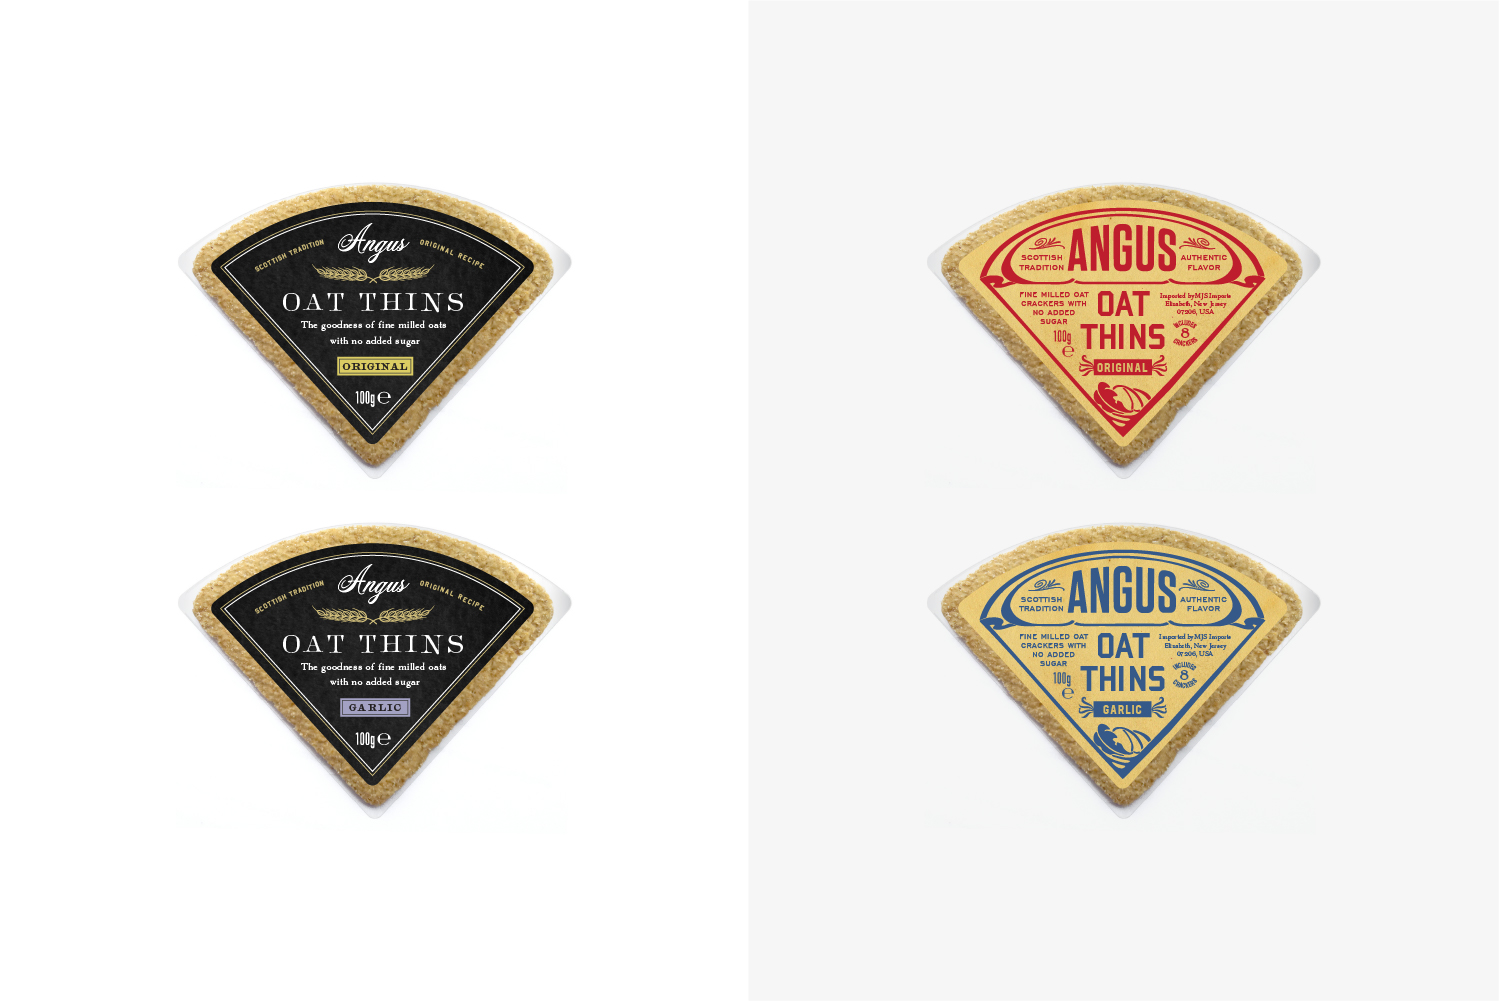 Alternate Angus Oat thins packaging design concepts leaning more artisan and homespun. 